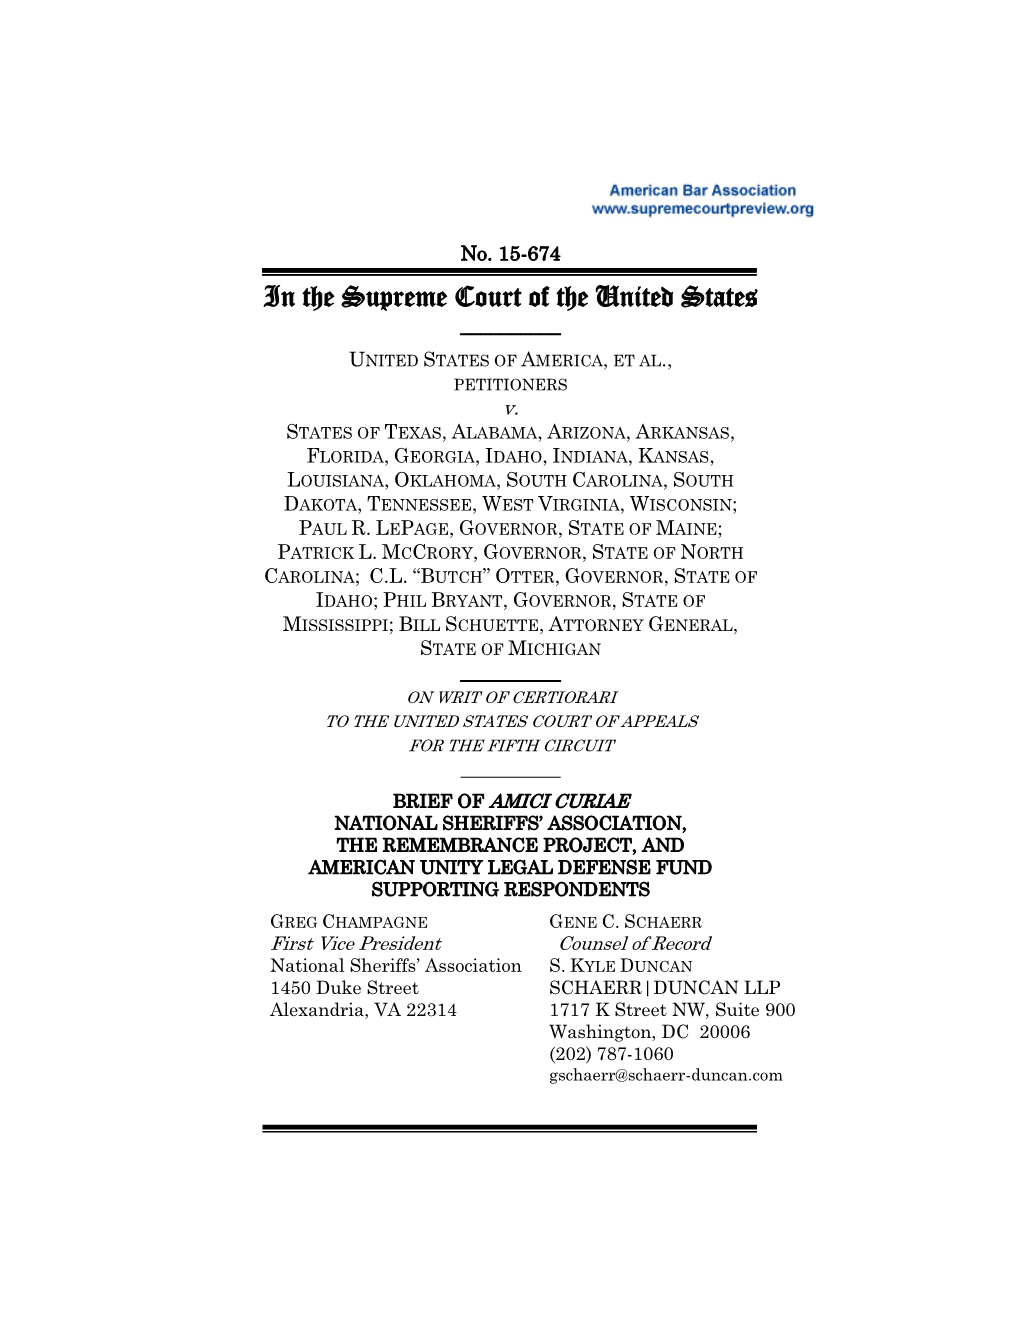 Amicus Brief for National Sheriff's Association